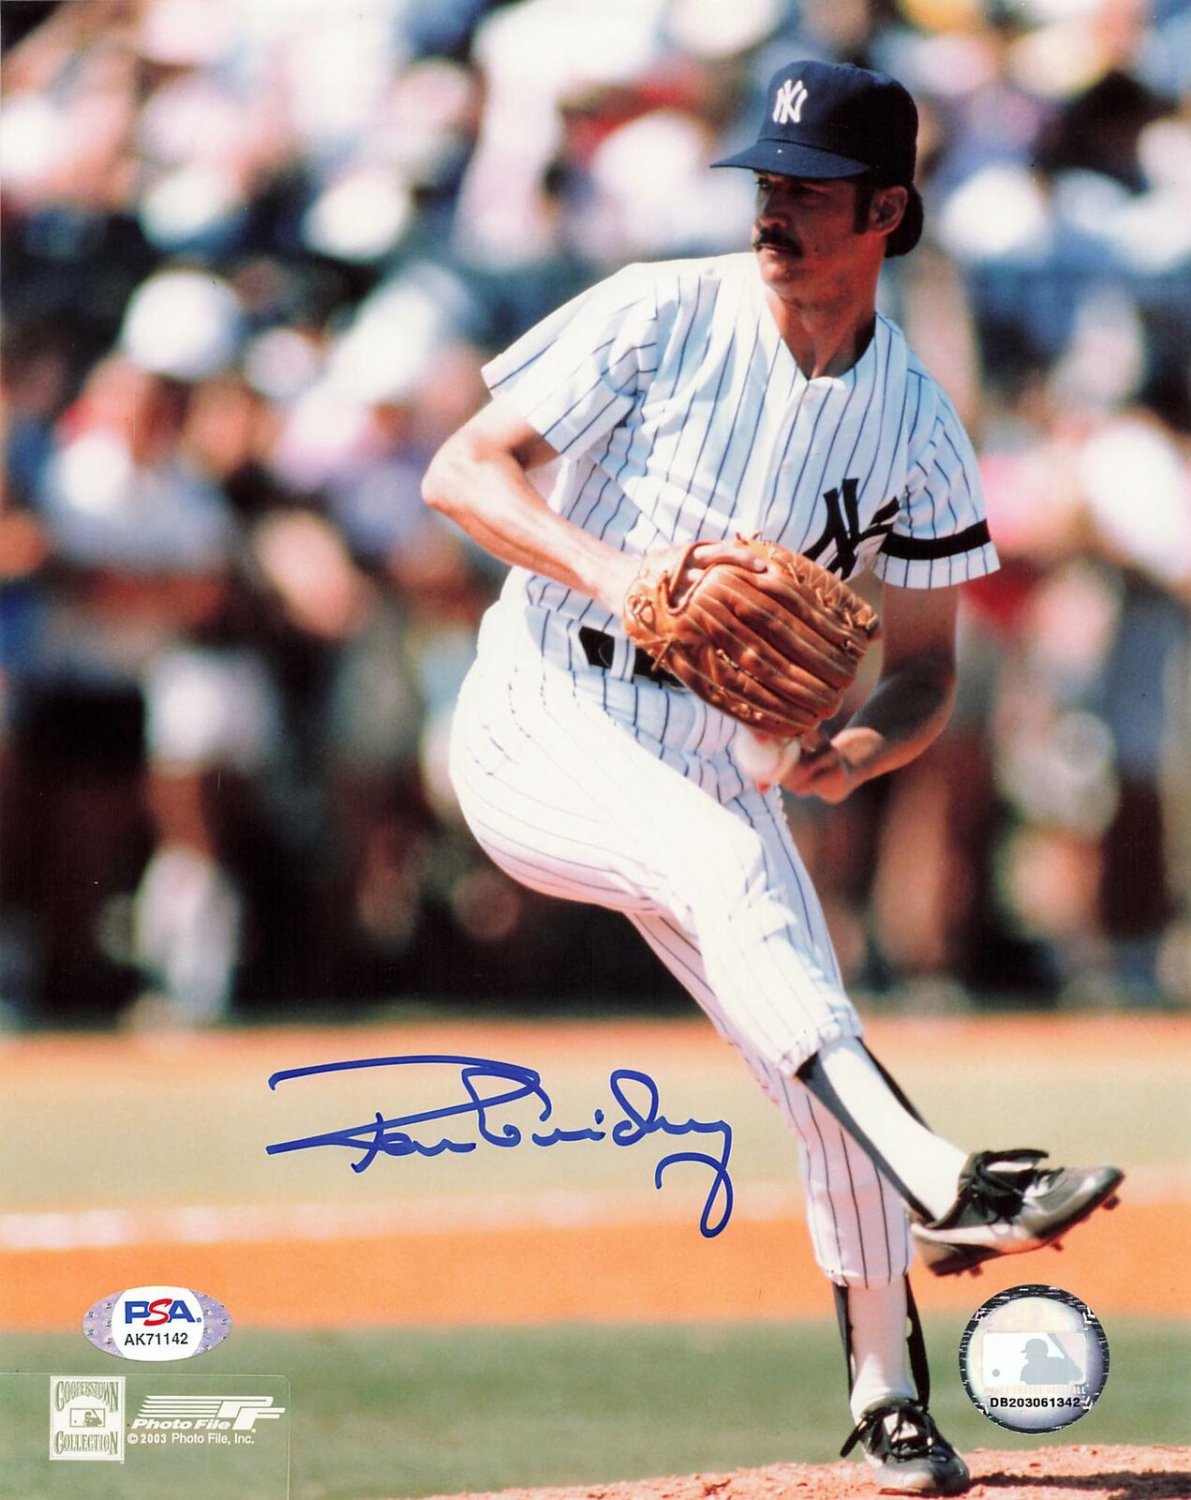 Autographed Ron Guidry 8x10 New York Yankees Photo